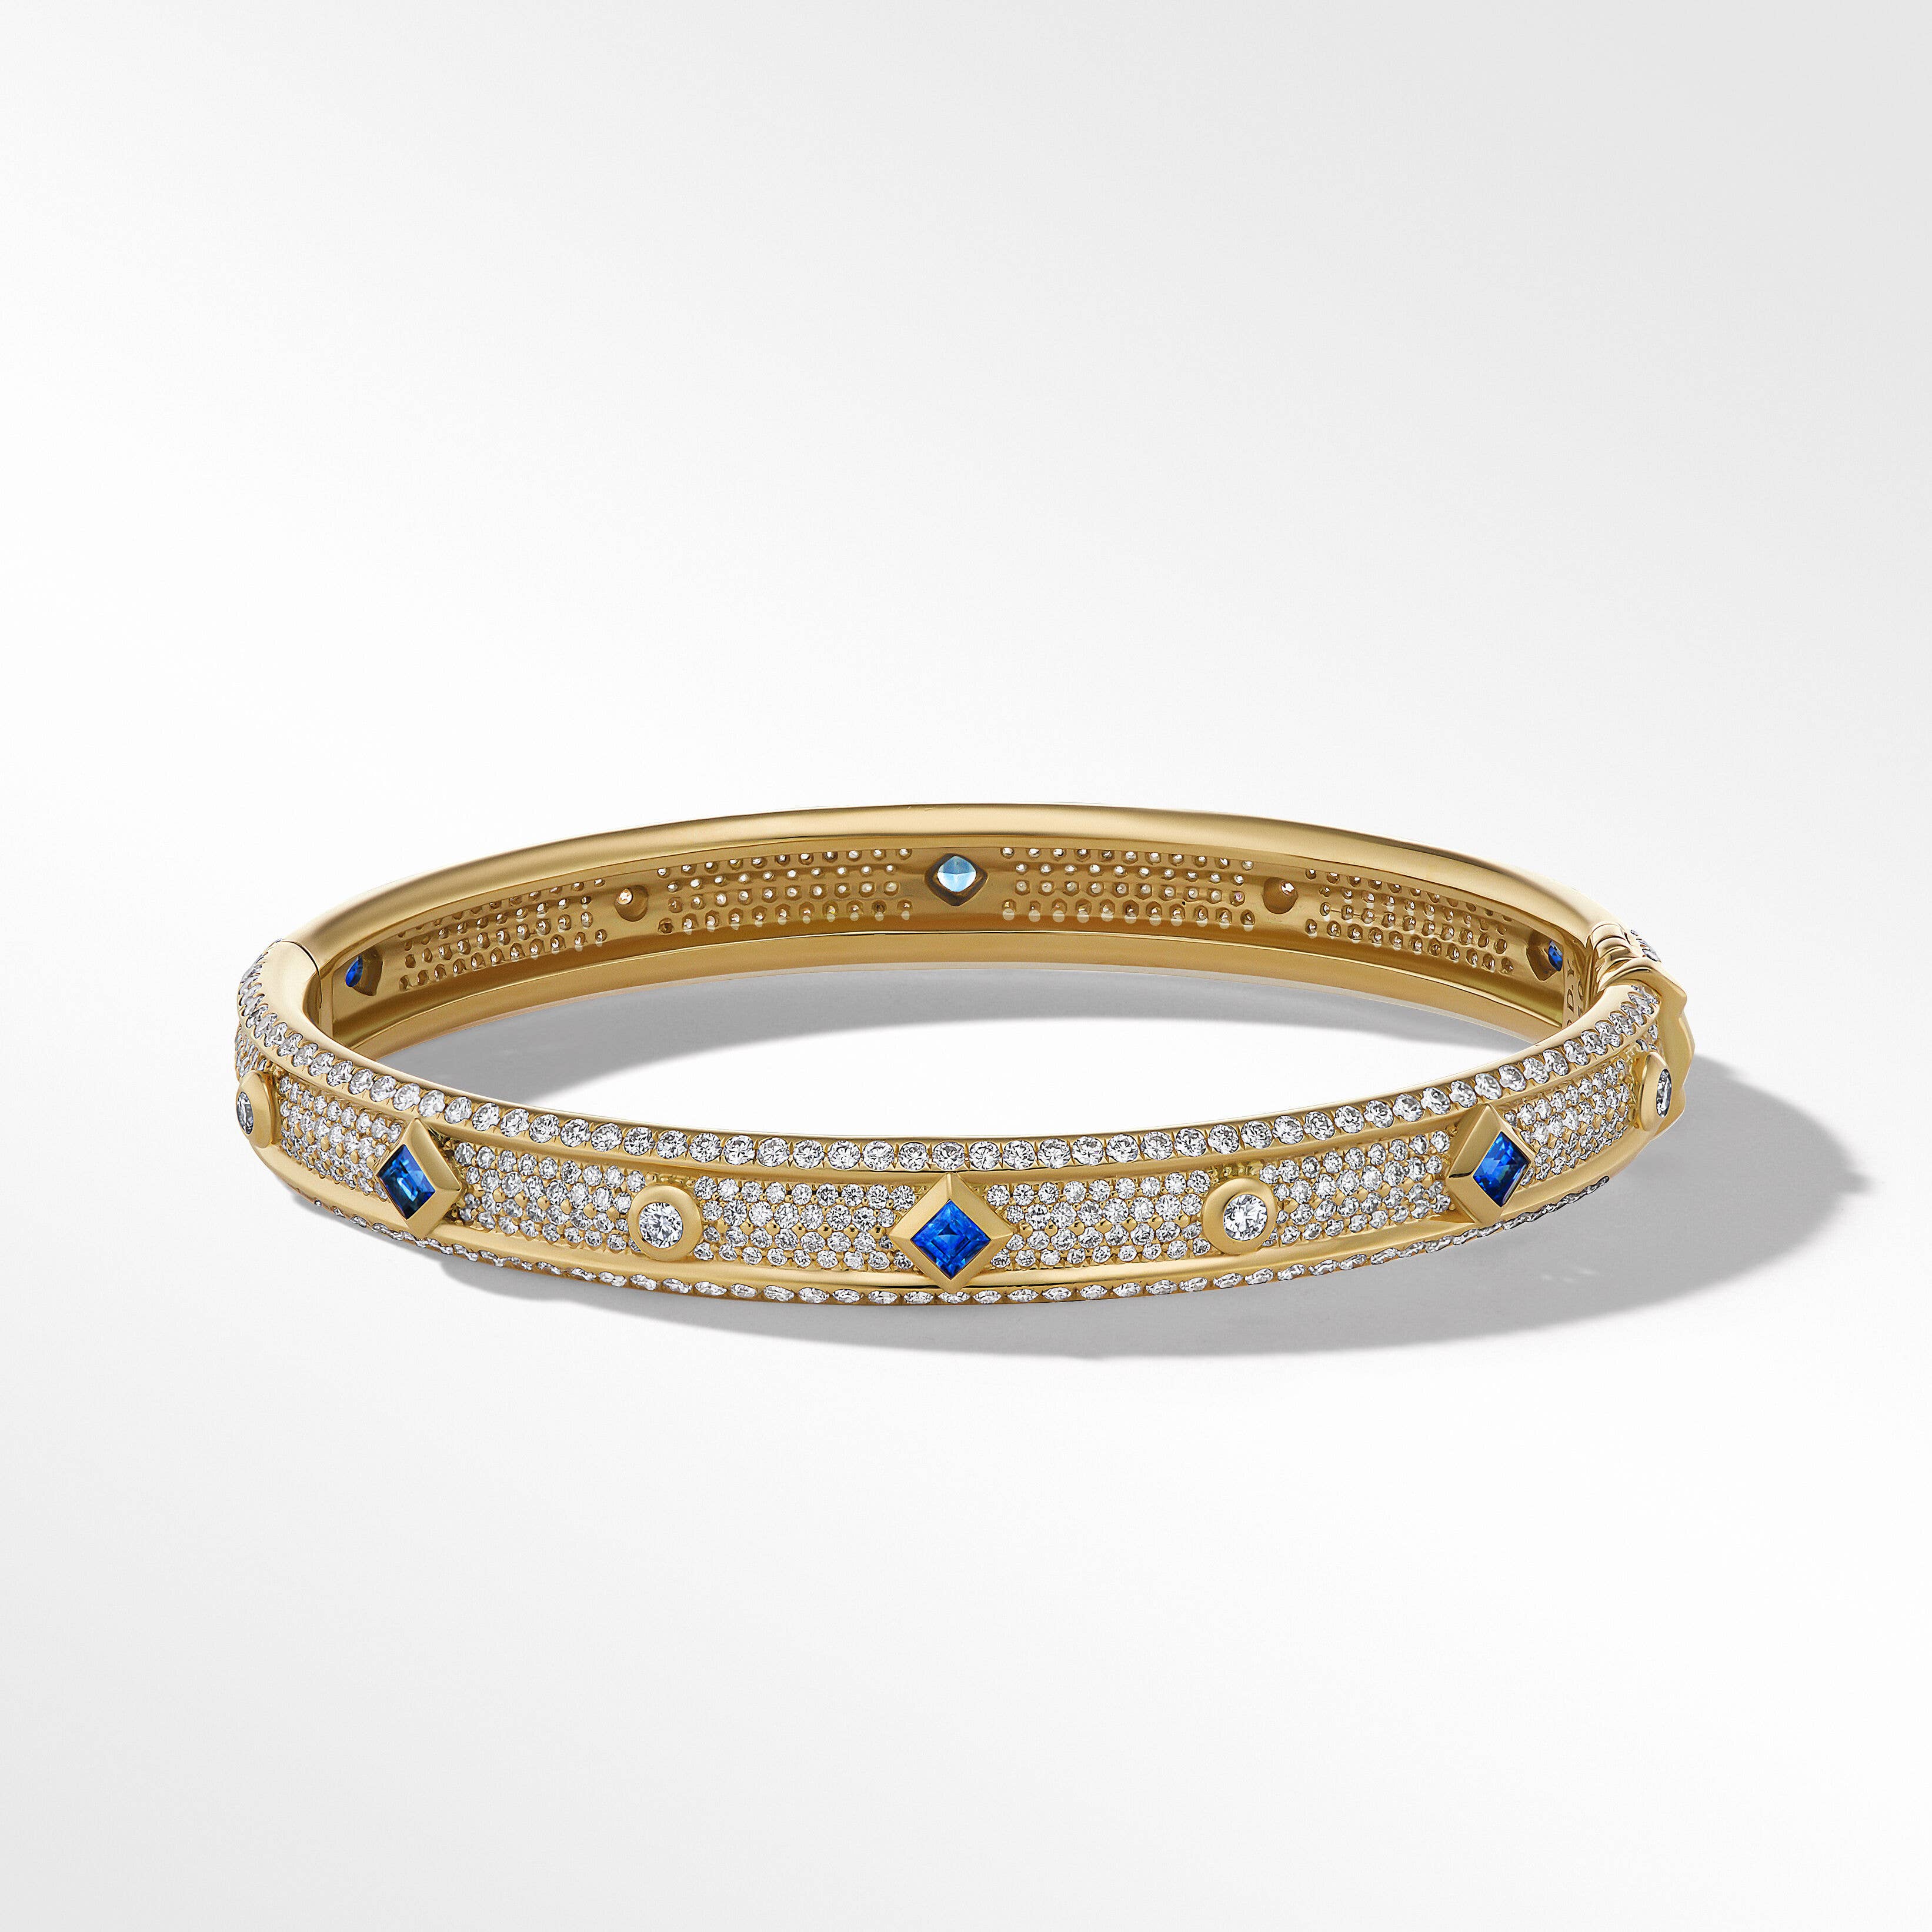 Modern Renaissance Bracelet in 18K Yellow Gold with Full Pavé Diamonds and Sapphires